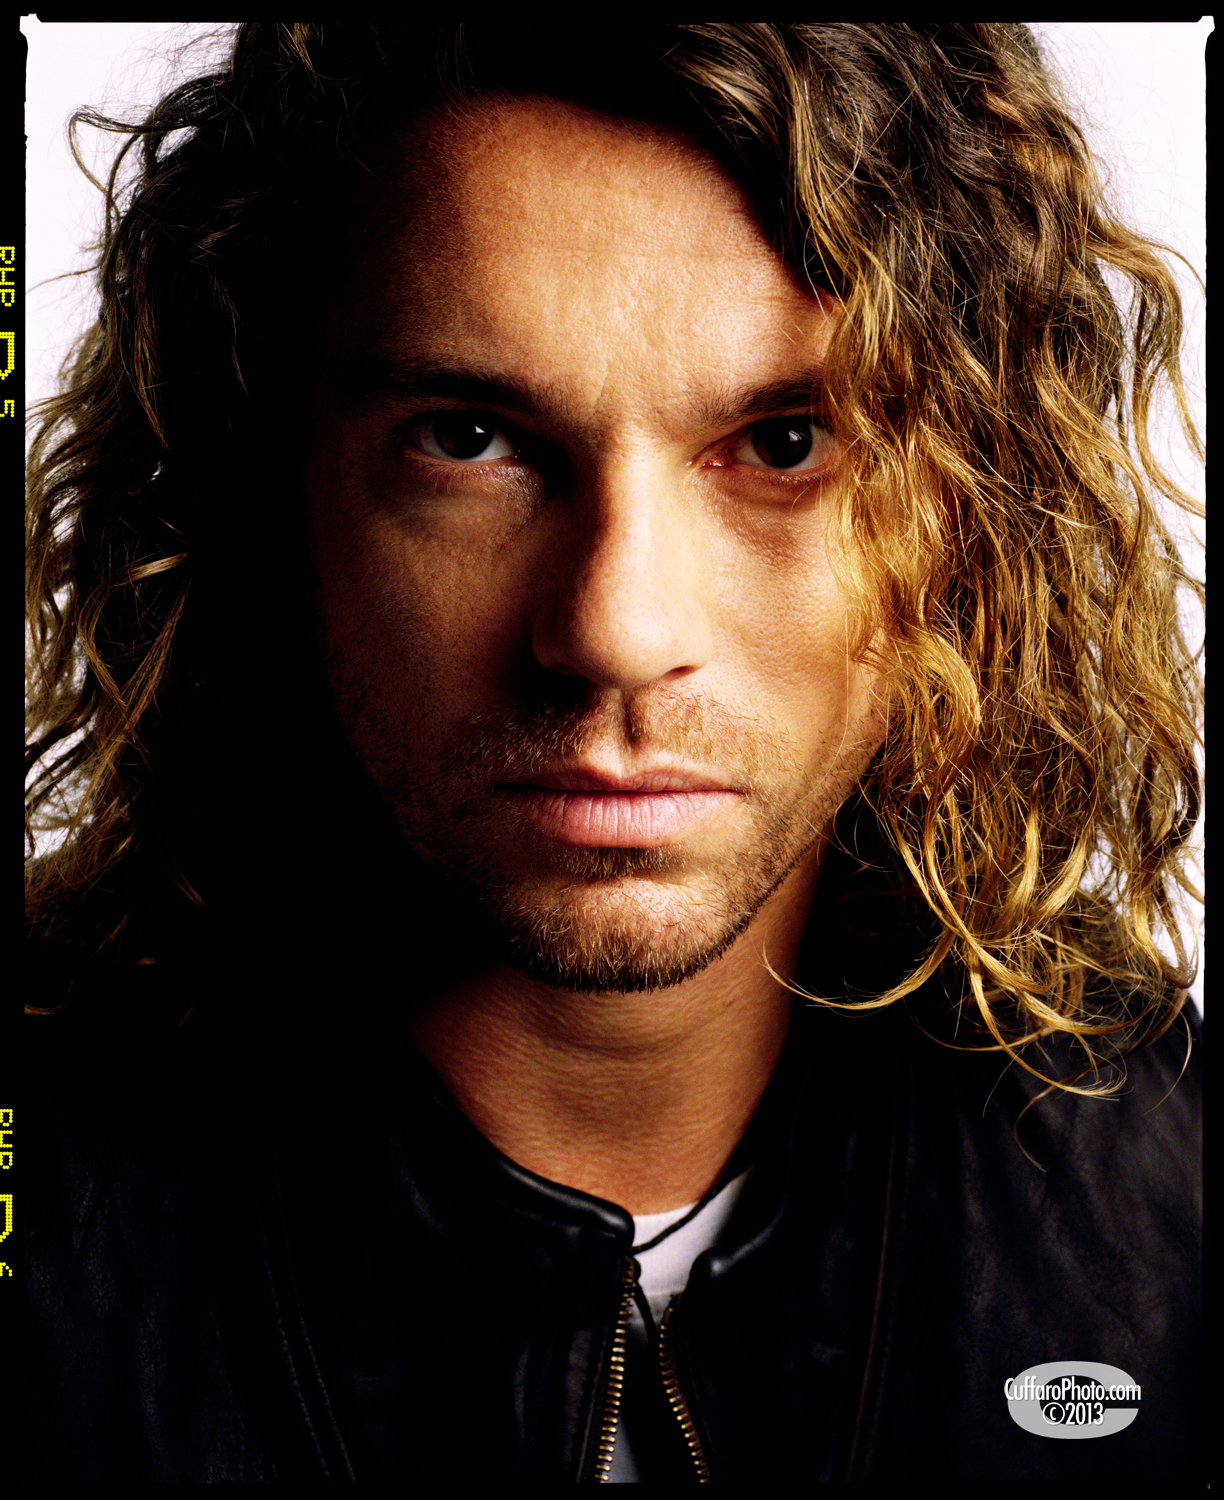 Micheal Hutchence Backgrounds, Compatible - PC, Mobile, Gadgets| 1224x1500 px